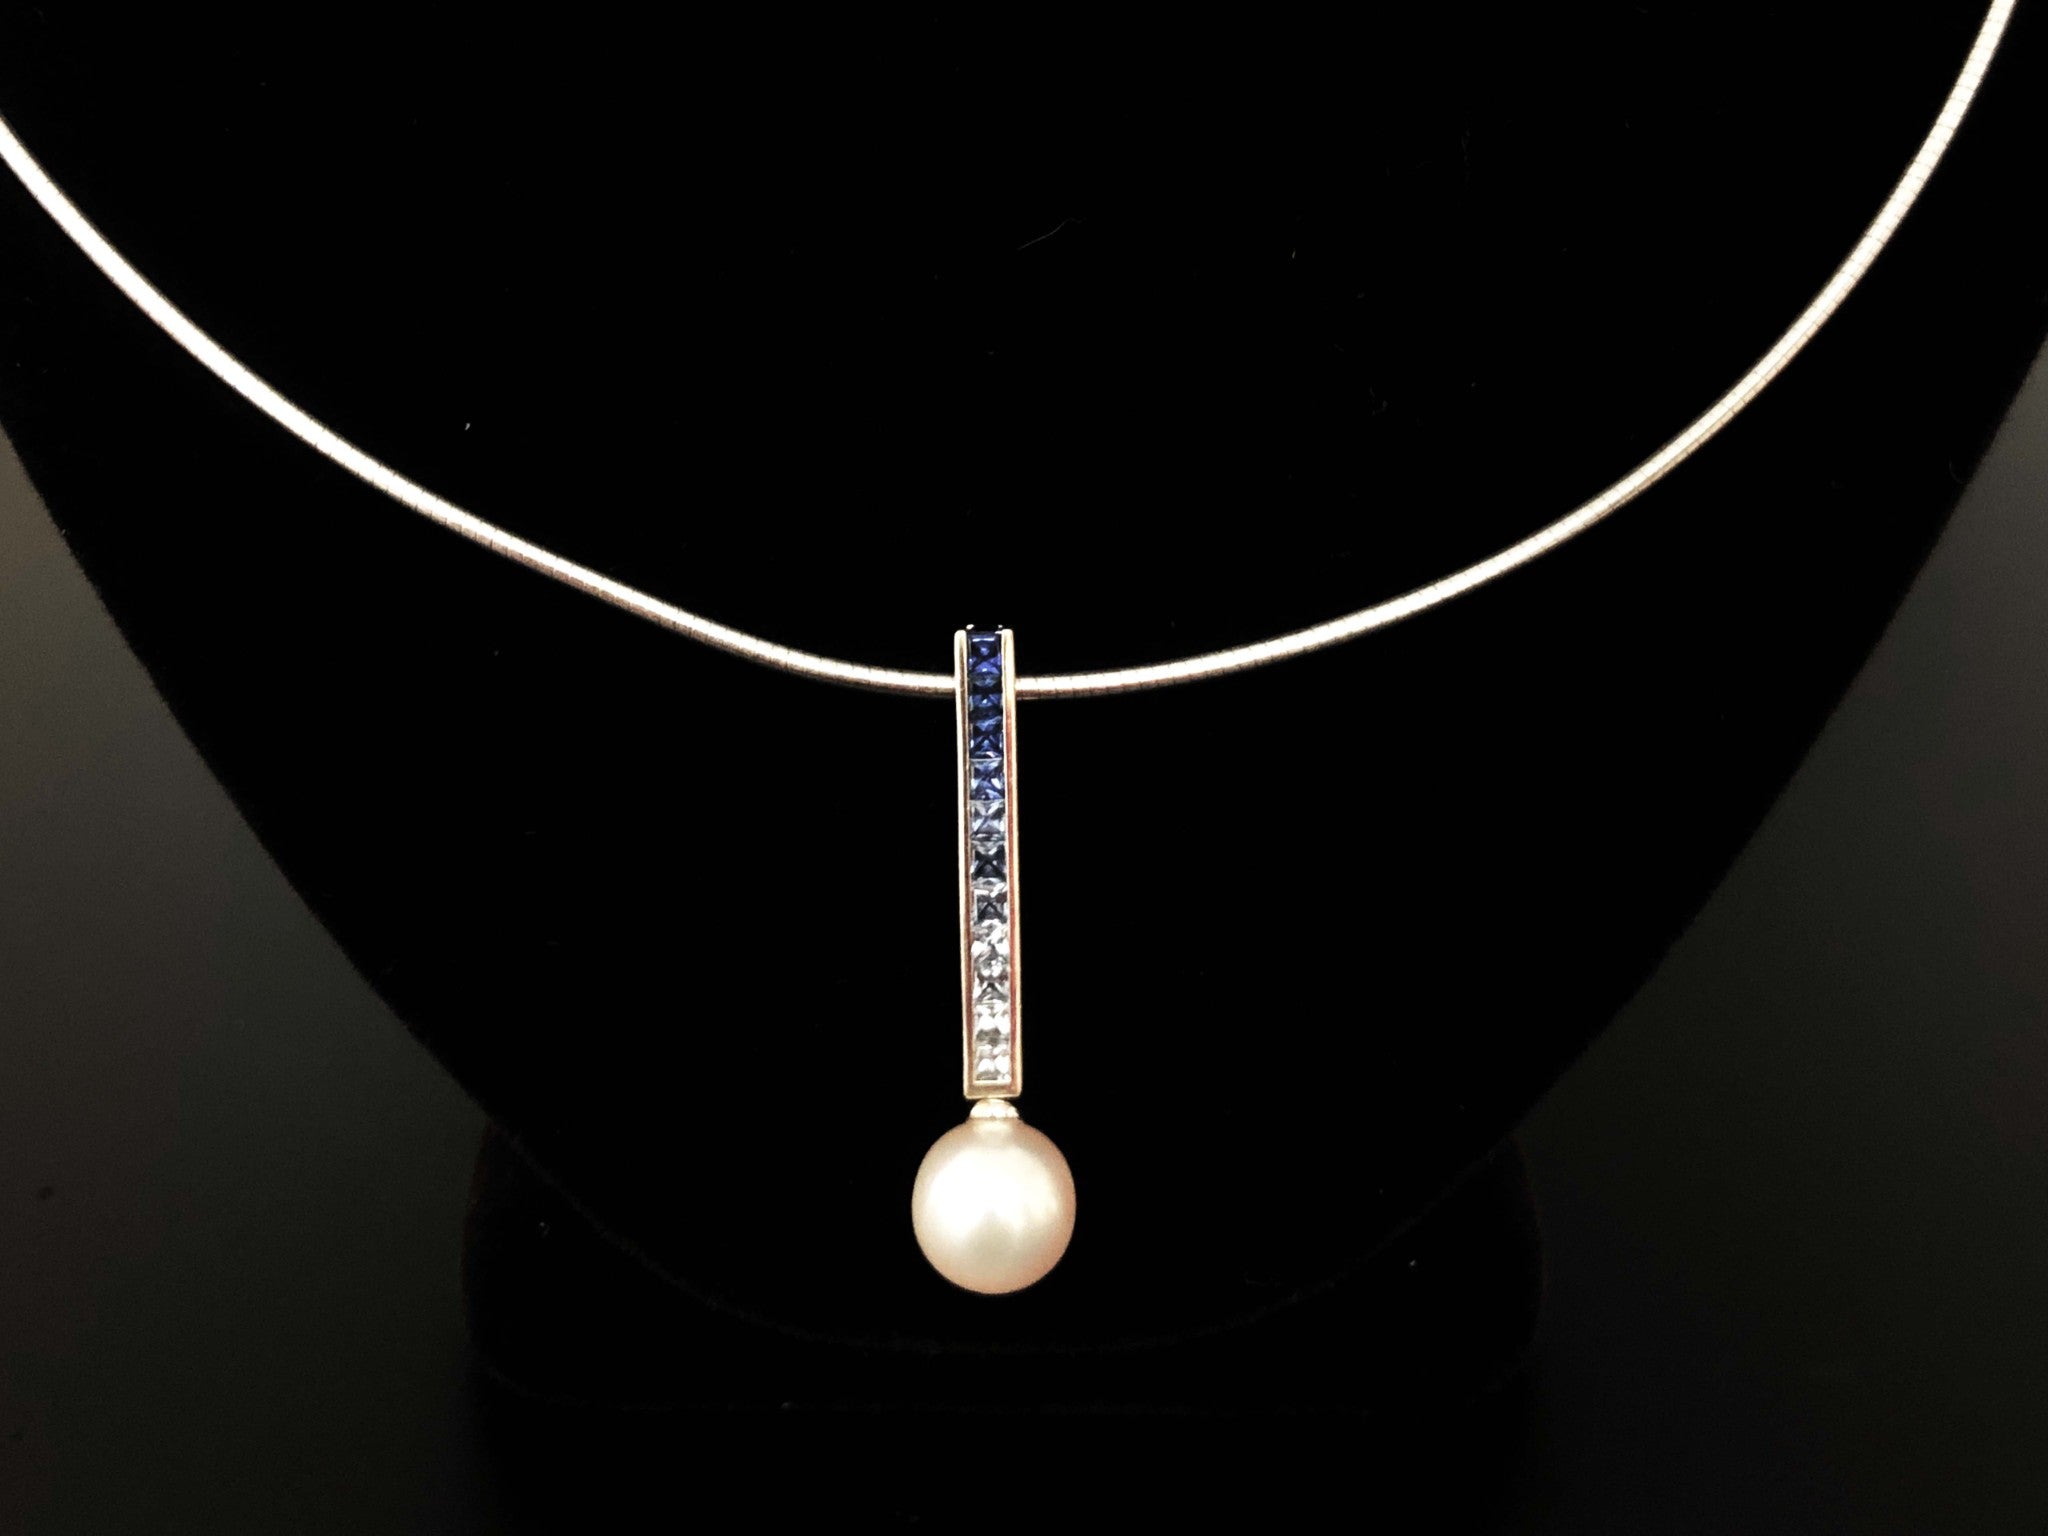 Mikimoto Blue Sapphire & Akoya Pearl Ocean Necklace in 18k White Gold